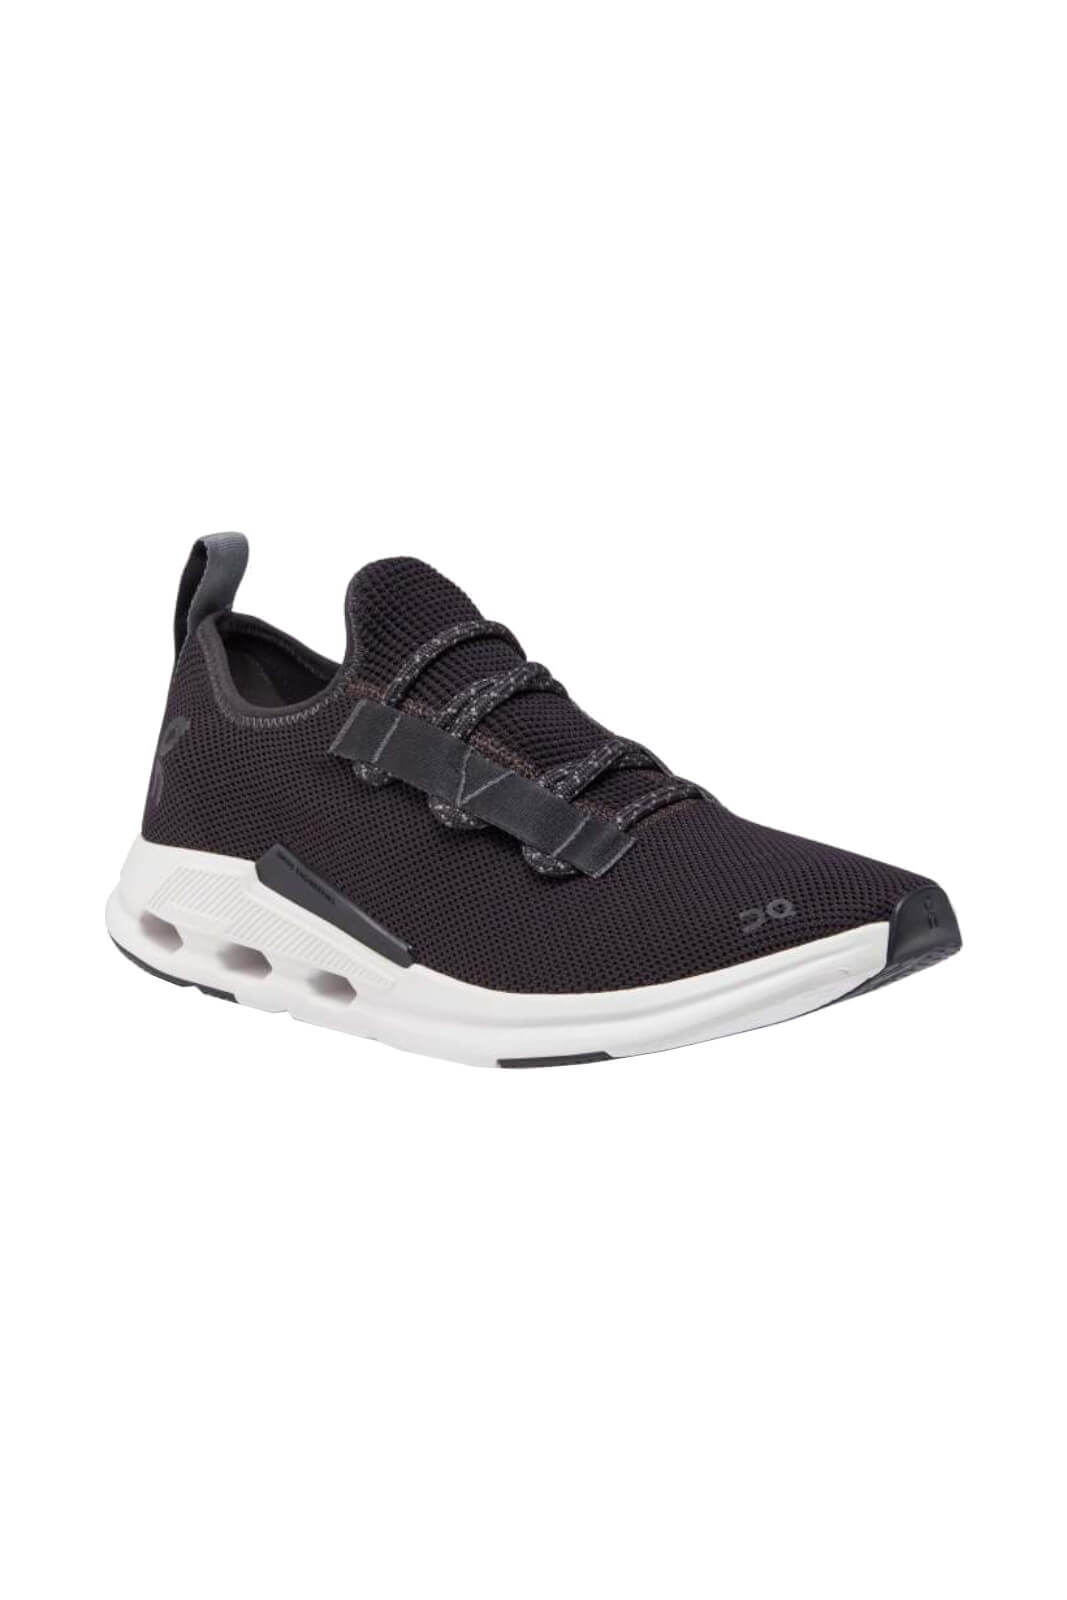 ON sneakers uomo CLOUDEASY